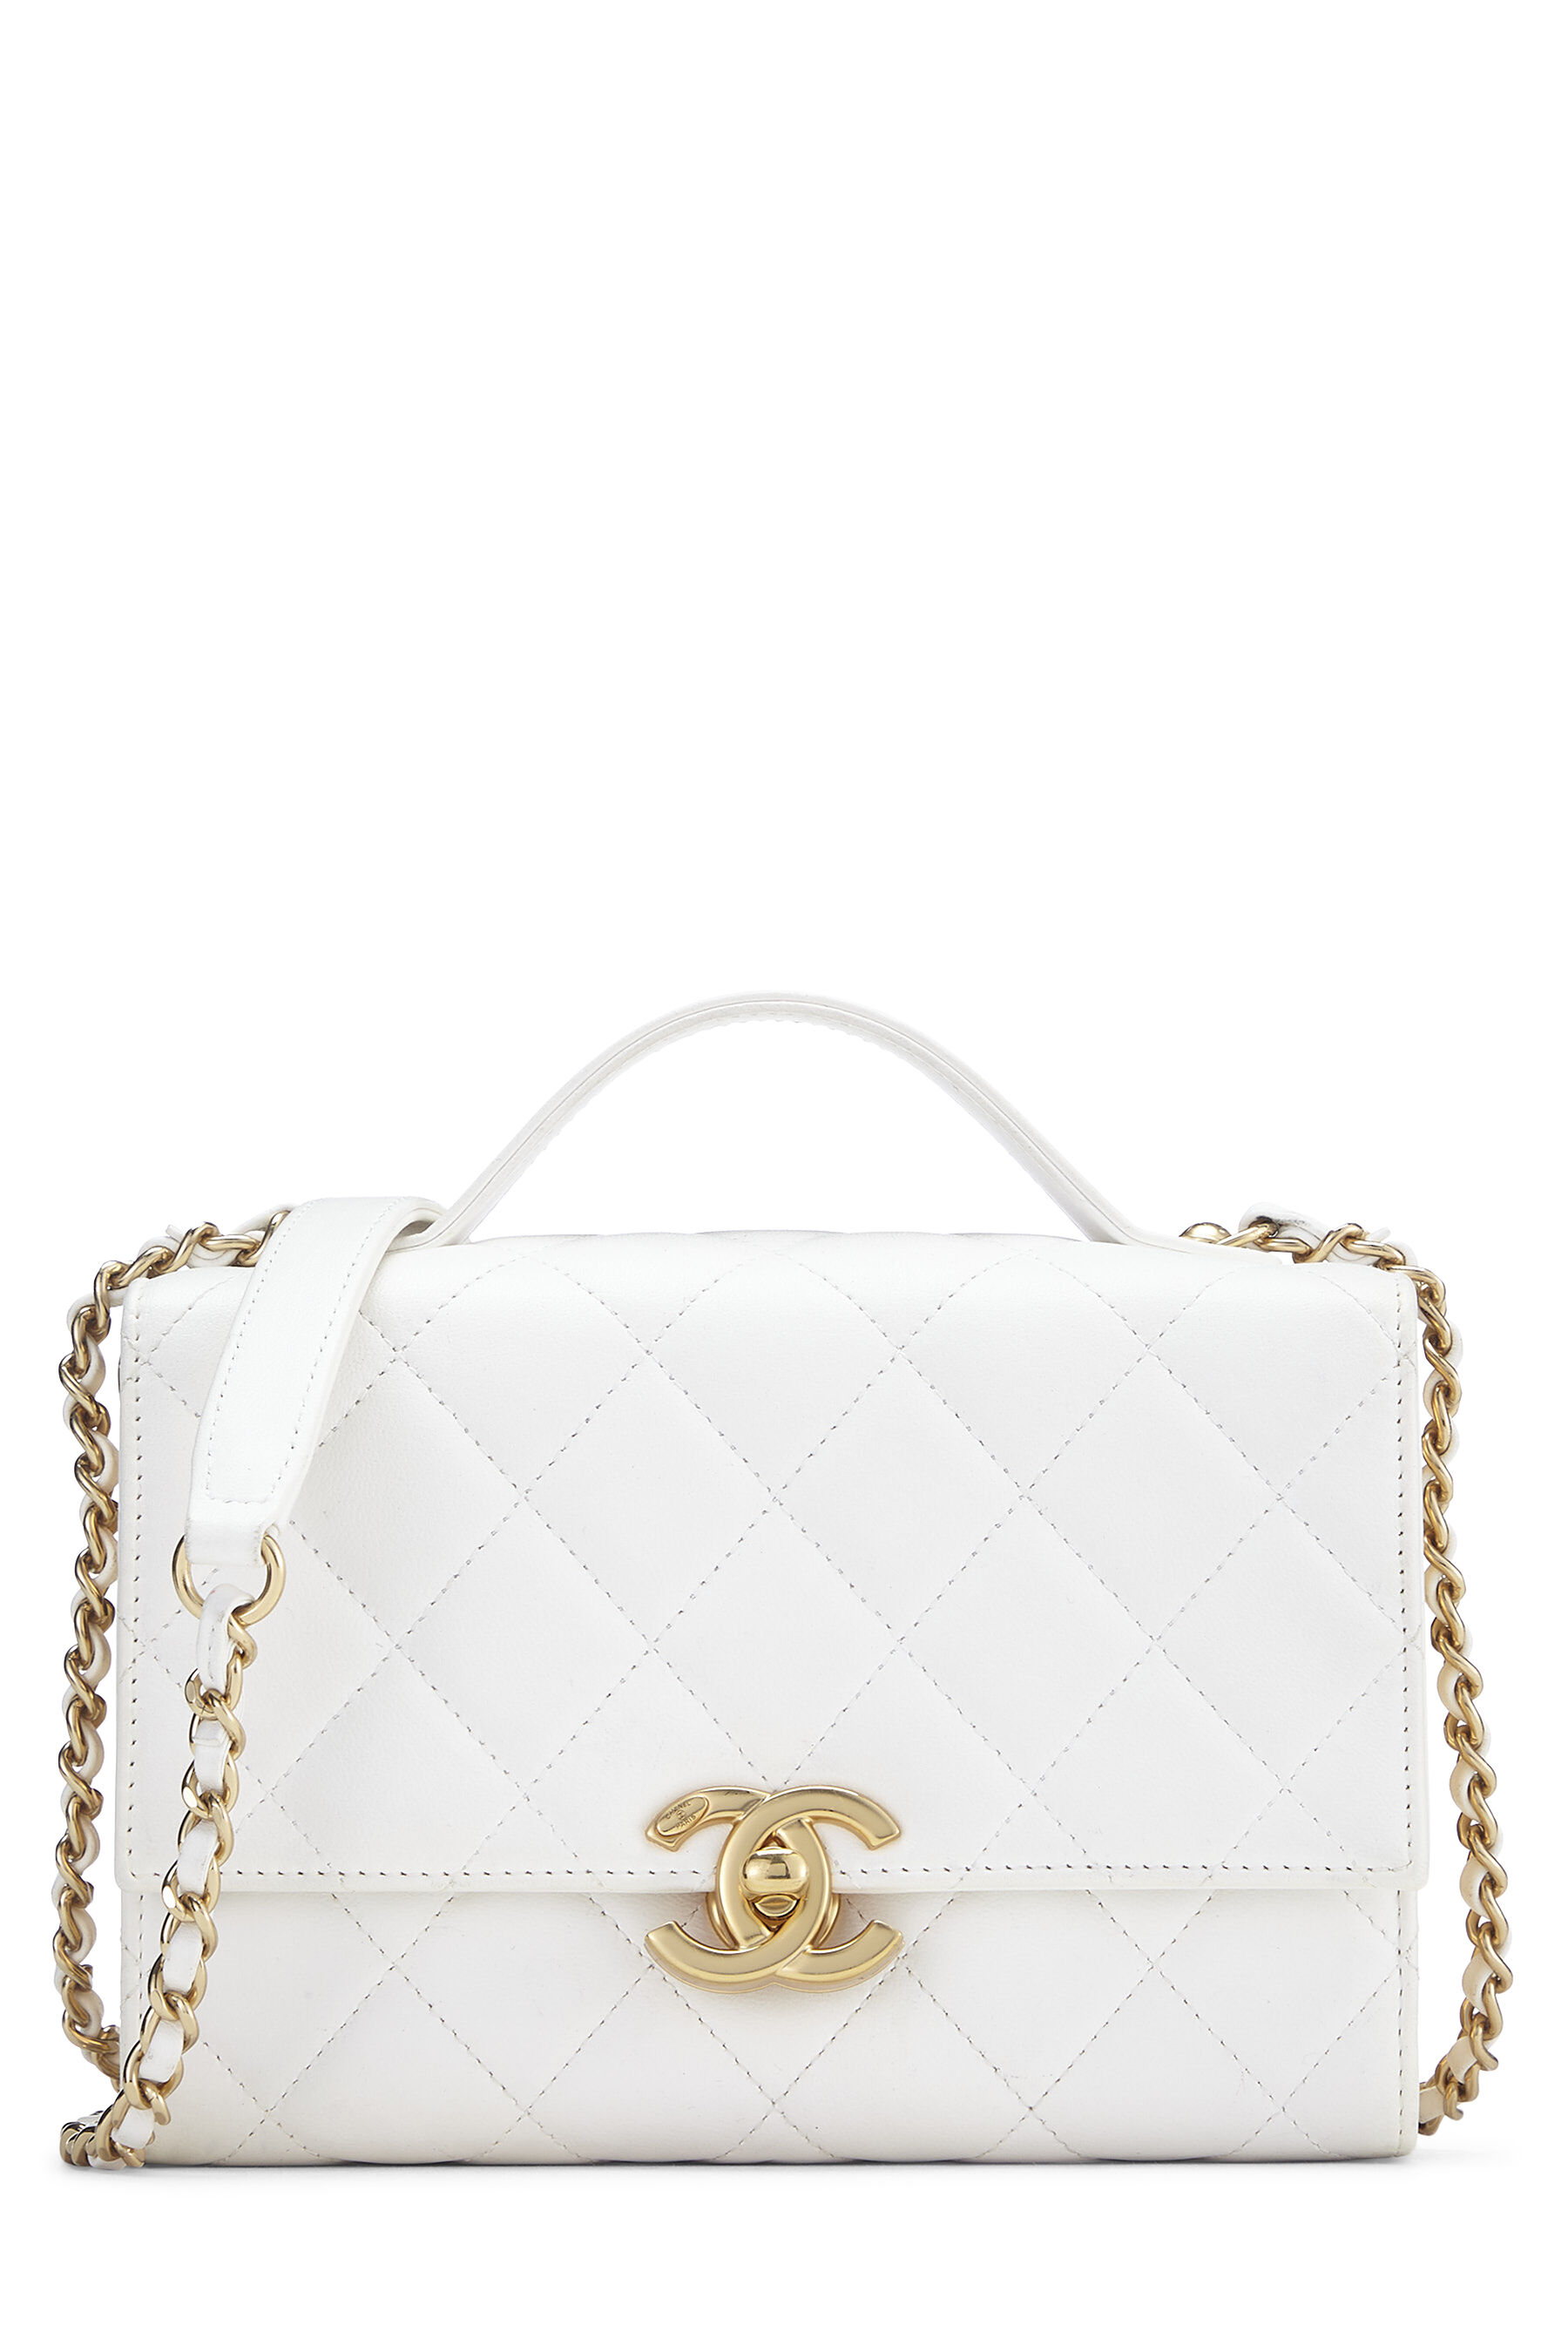 Chanel, Pre-Loved White Calfskin Top Handle Flap Bag, White